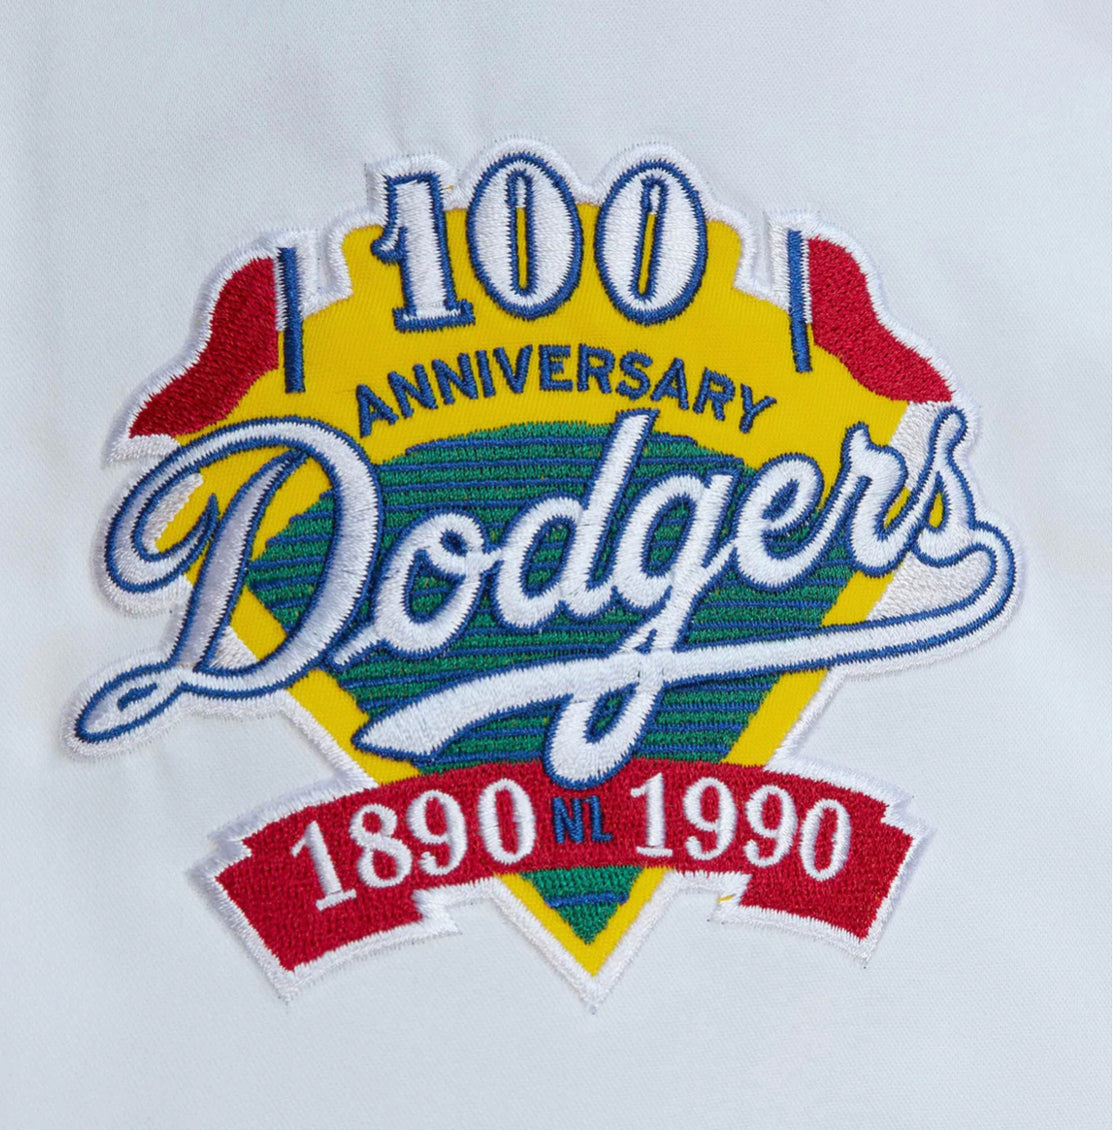 Los Angeles Dodgers City Collection Mitchell and Ness Lightweight Satin Jacket